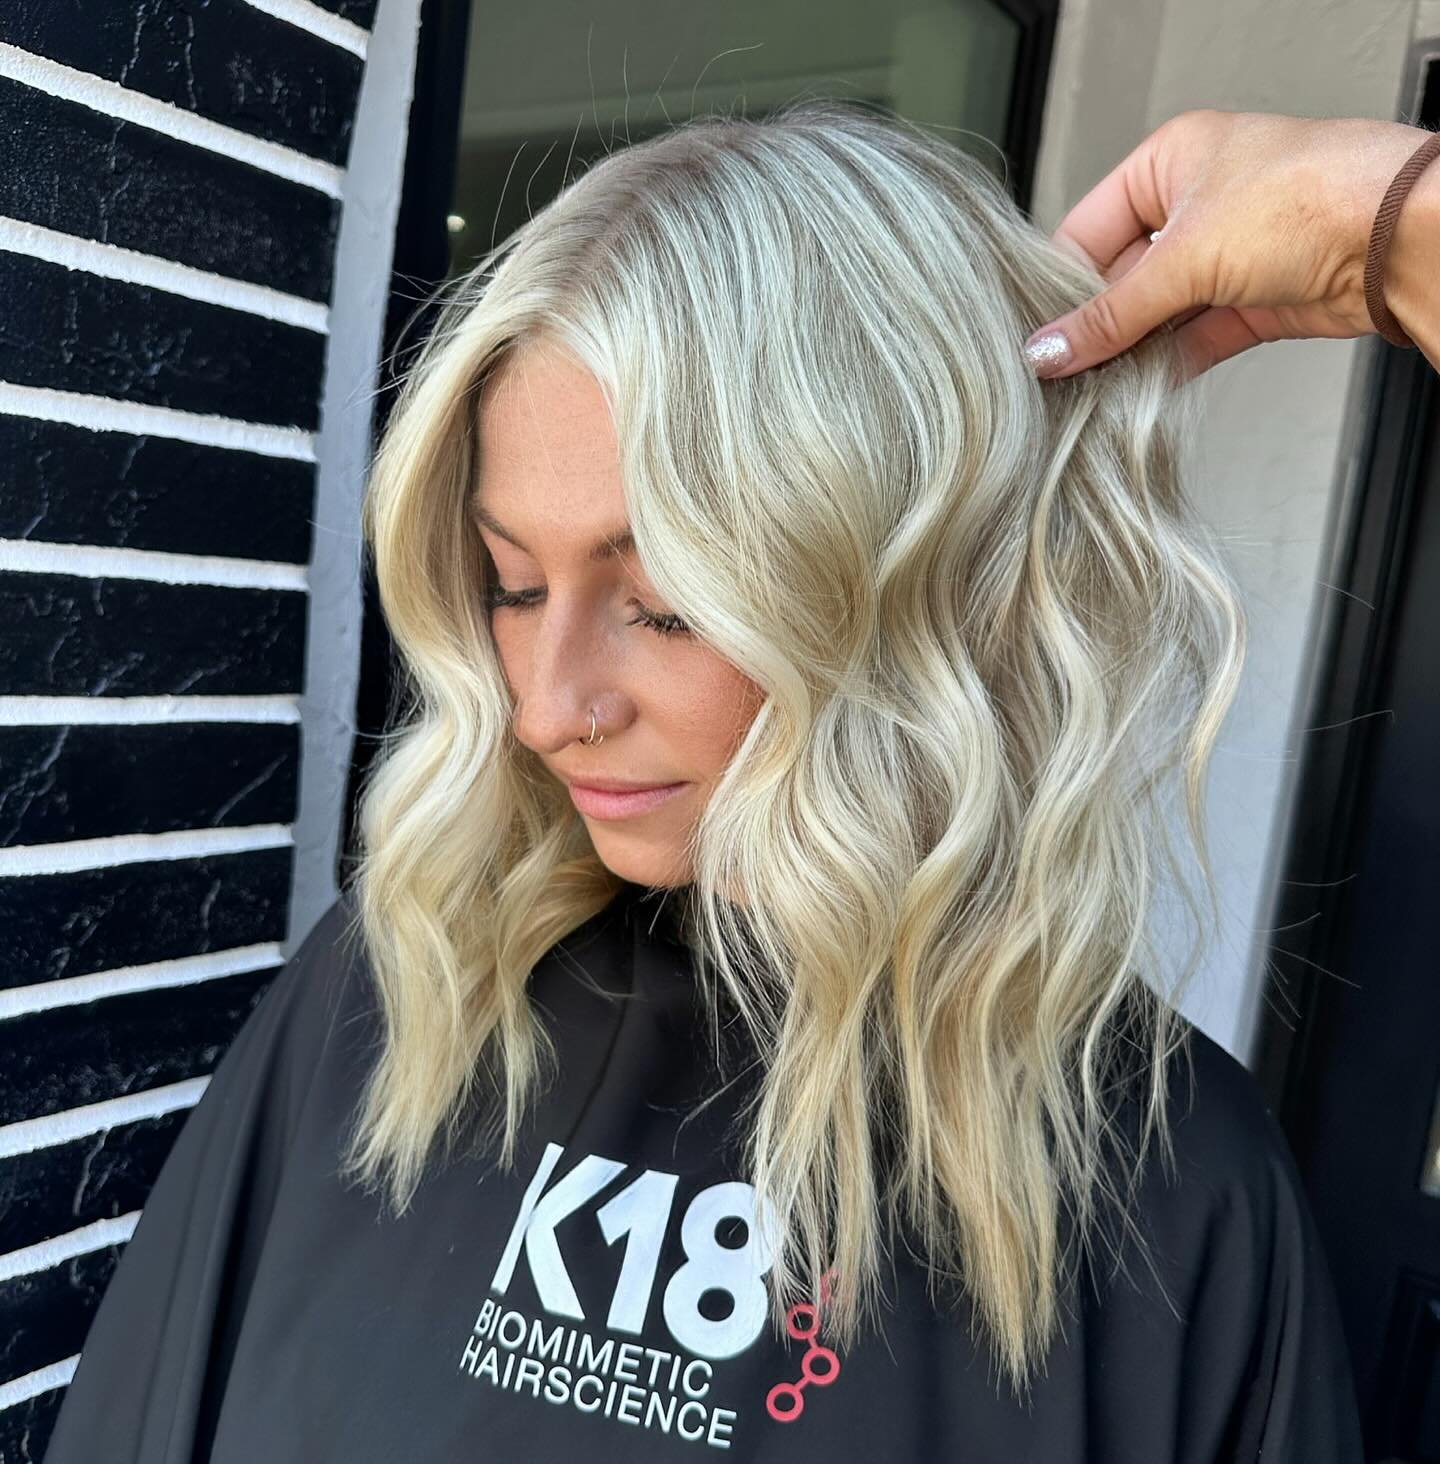 All of our blondies are kissed with a little @k18hair 

Stylist @blonde.me.ae 

We know the answer, but do you think we should be sponsored by K18?